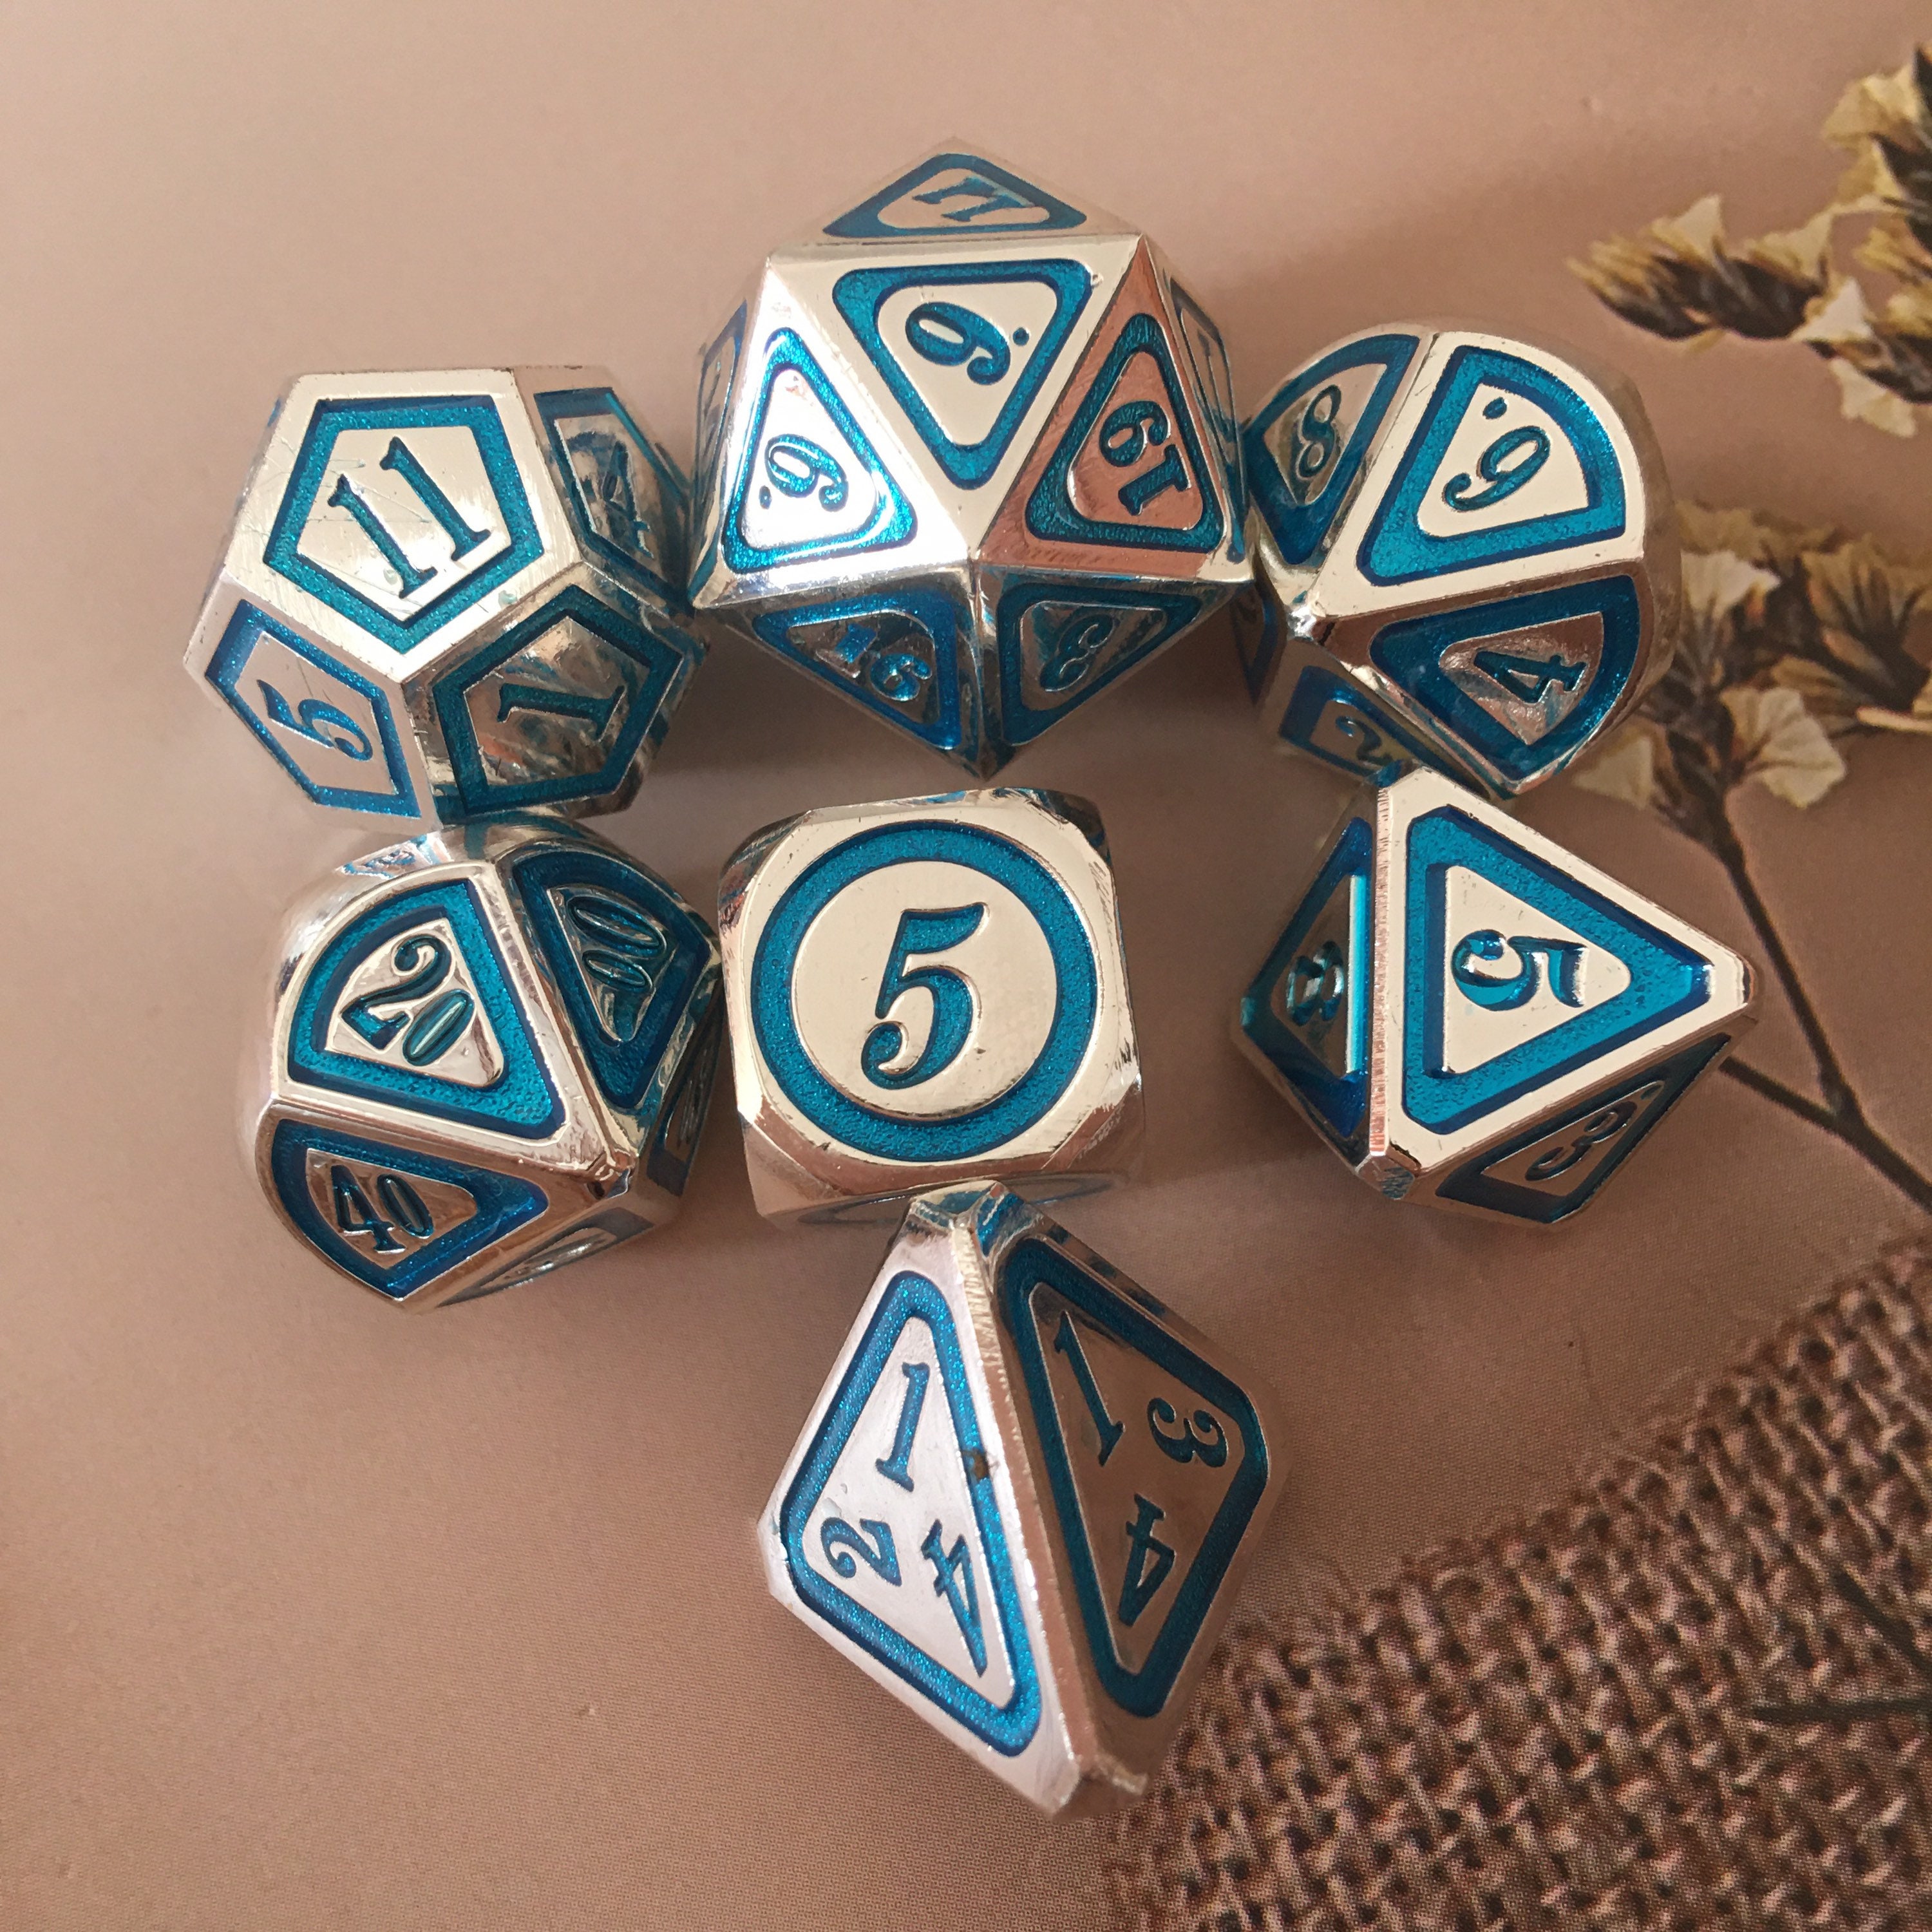 LoveinDIY 14 Pieces Polyhedral Metal Dice for D&D Pathfinder RPG Game Silver and Blue